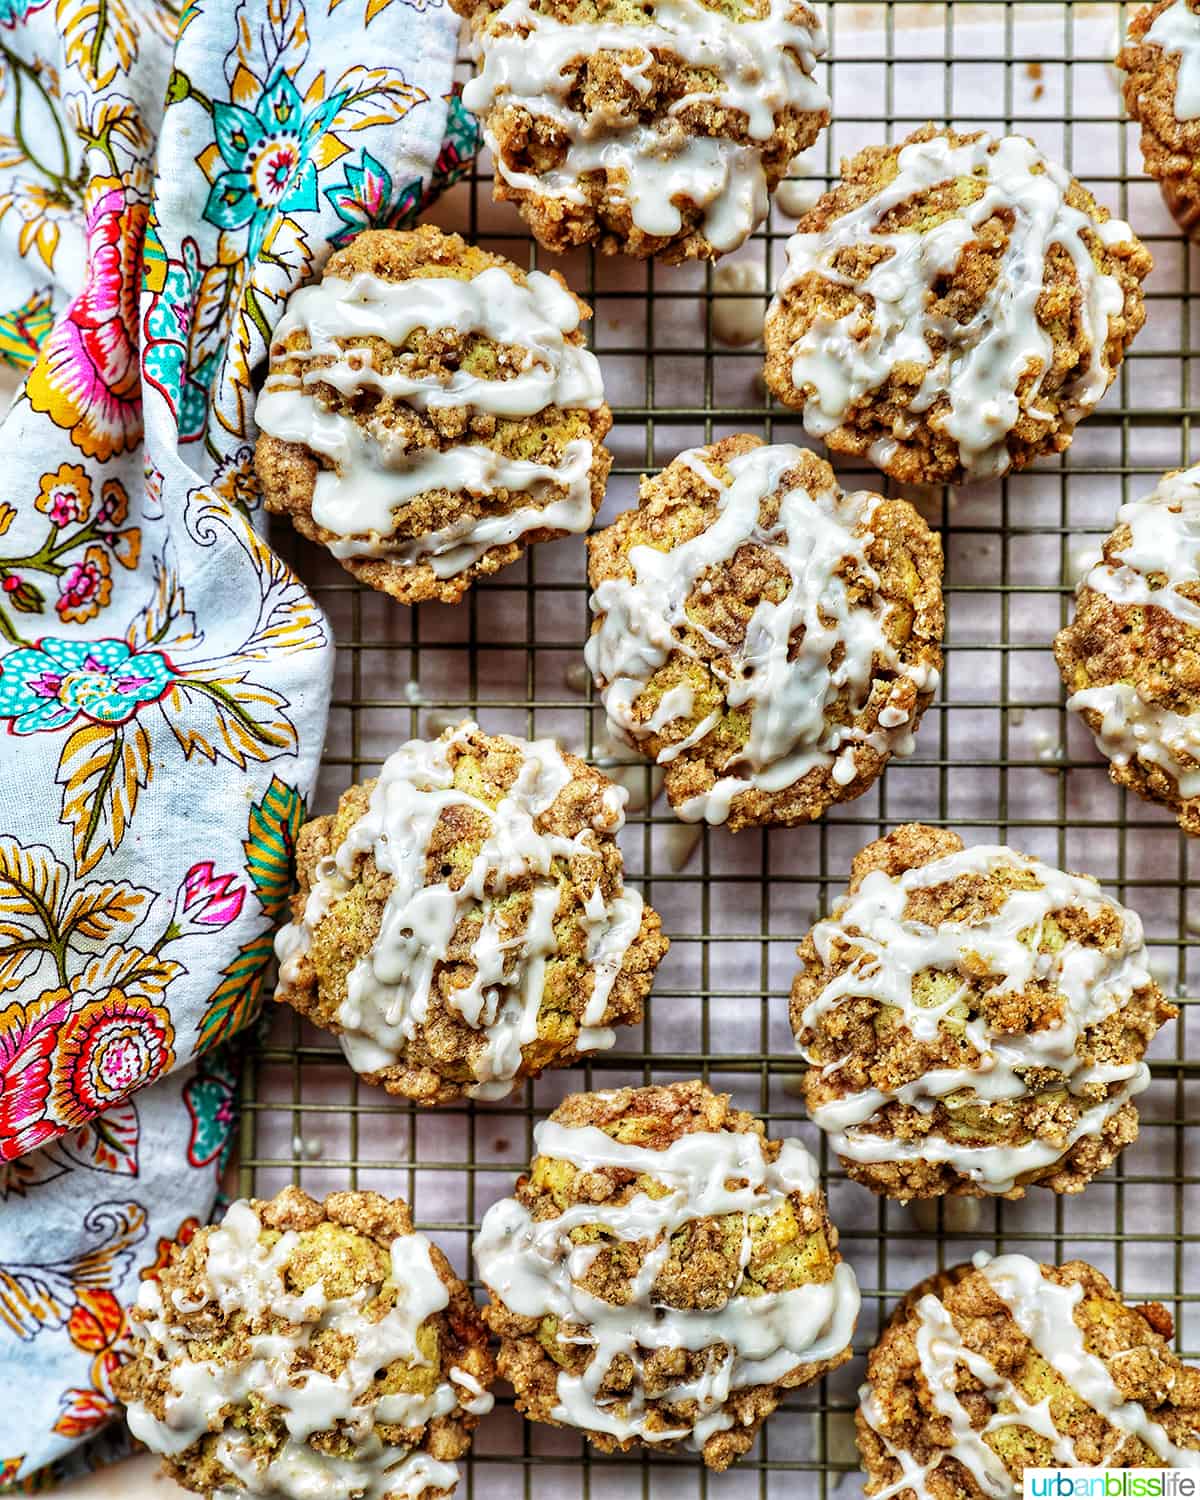 several vegan cinnamon streusel muffins on a wire rack with a colorful floral napkin.